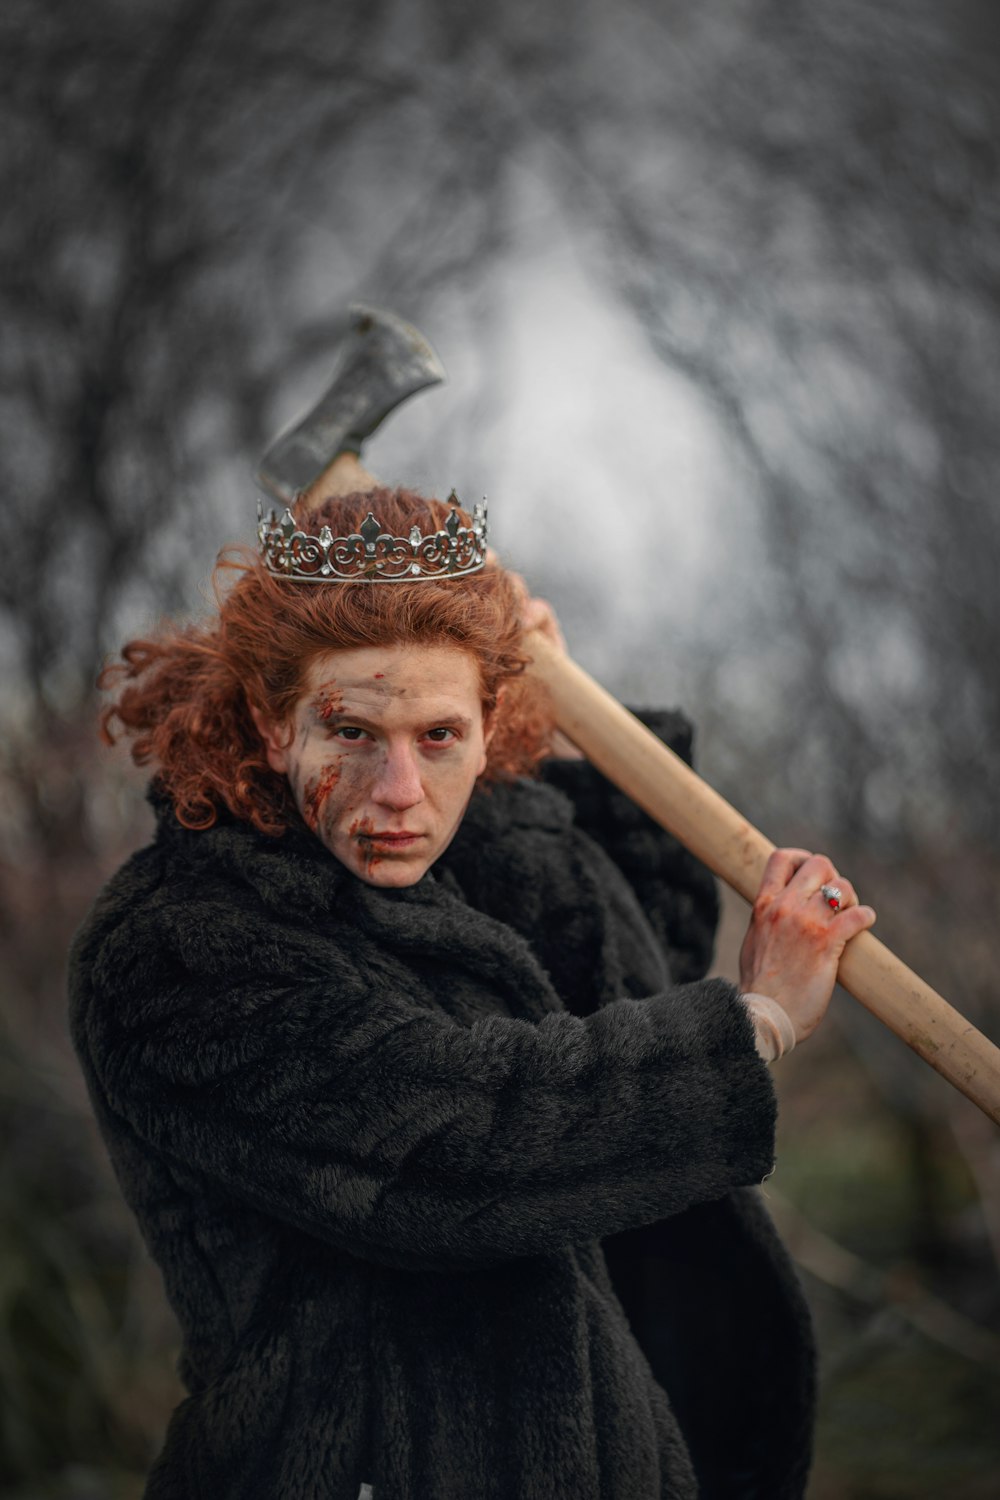 a woman with a crown on her head holding a large axe